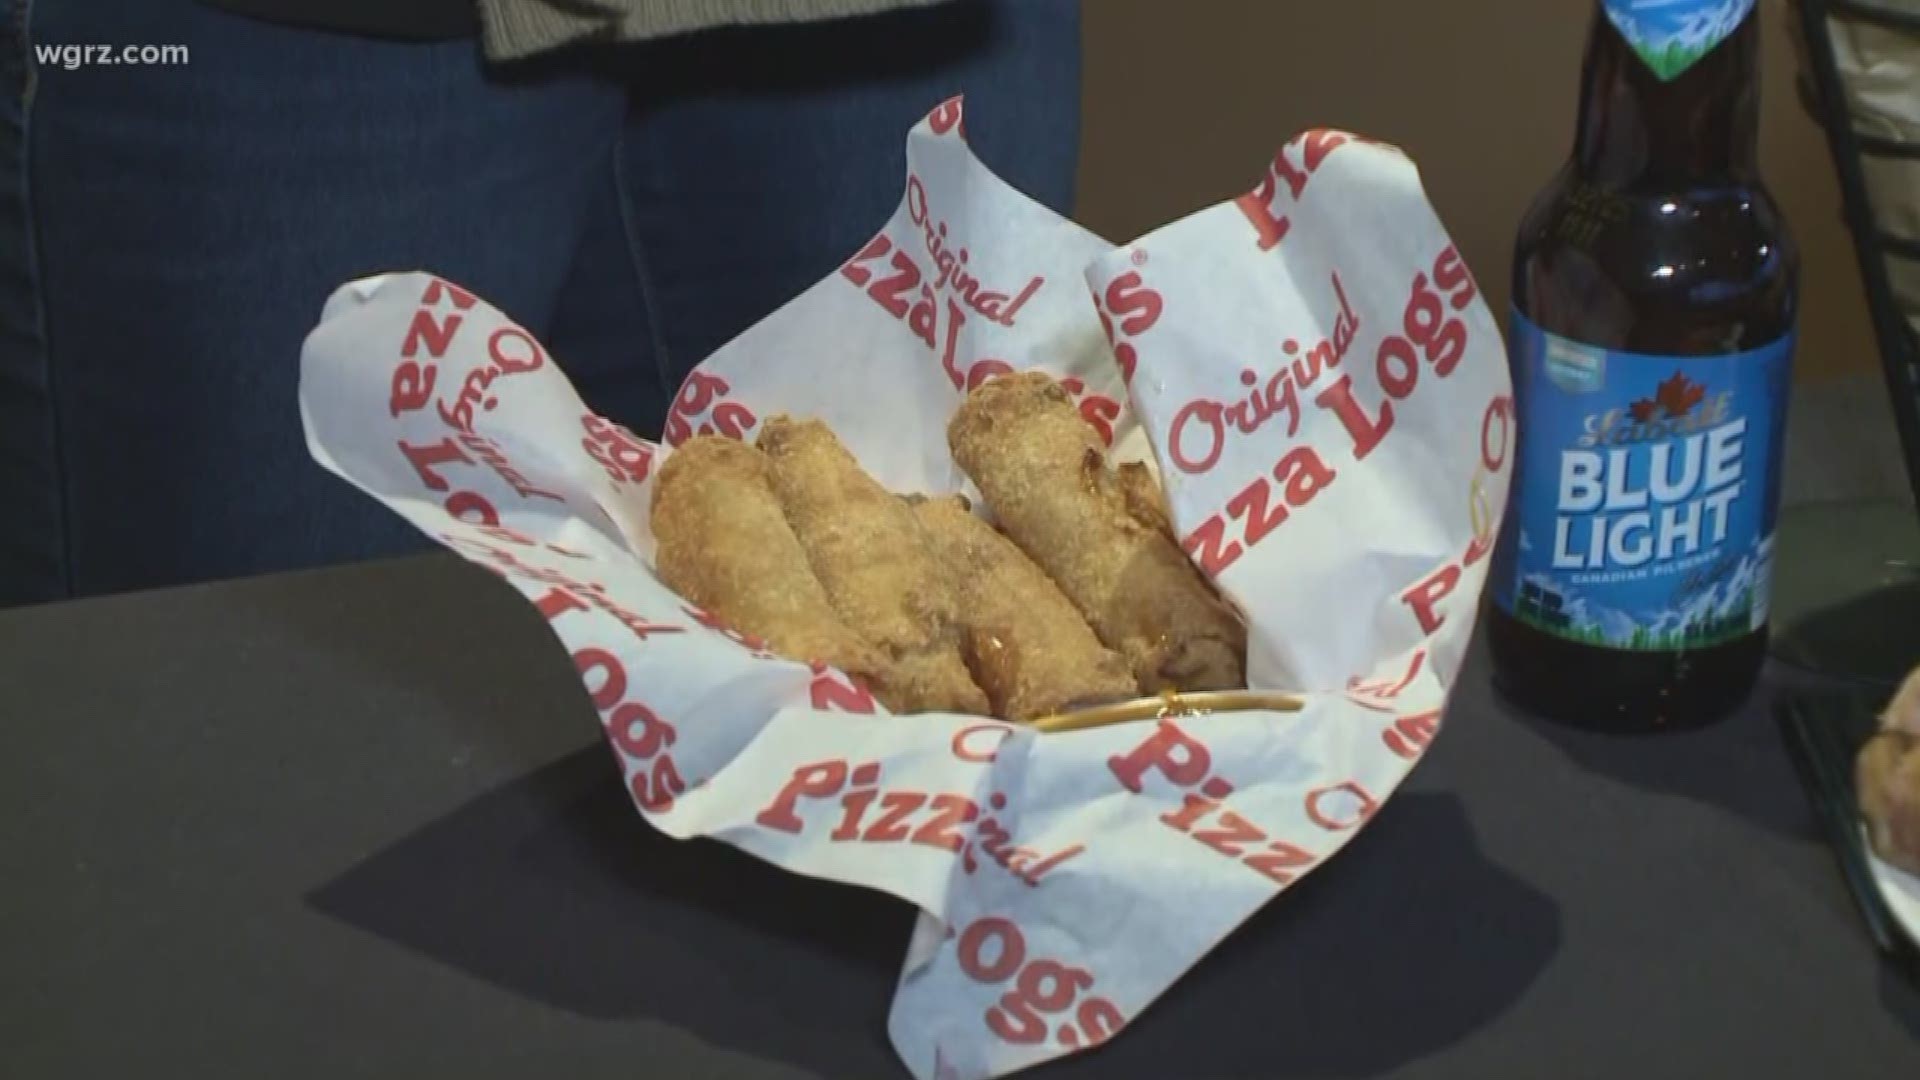 Daybreak's Kate Welshofer shows us what new foods will make their debut Opening Day at Coca-Cola Field.